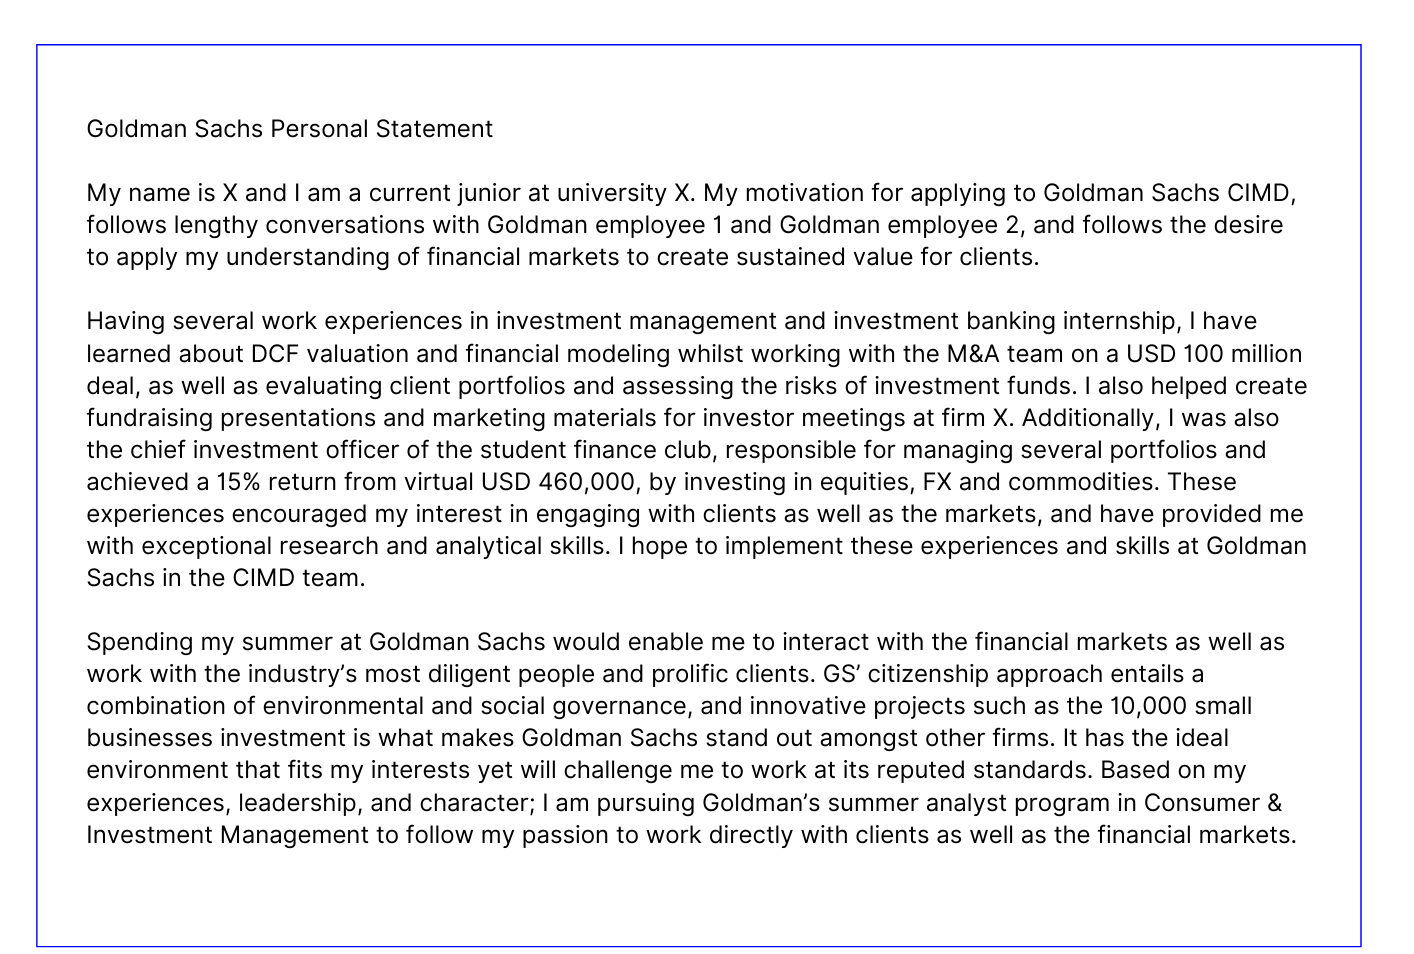 example goldman sachs cover letter